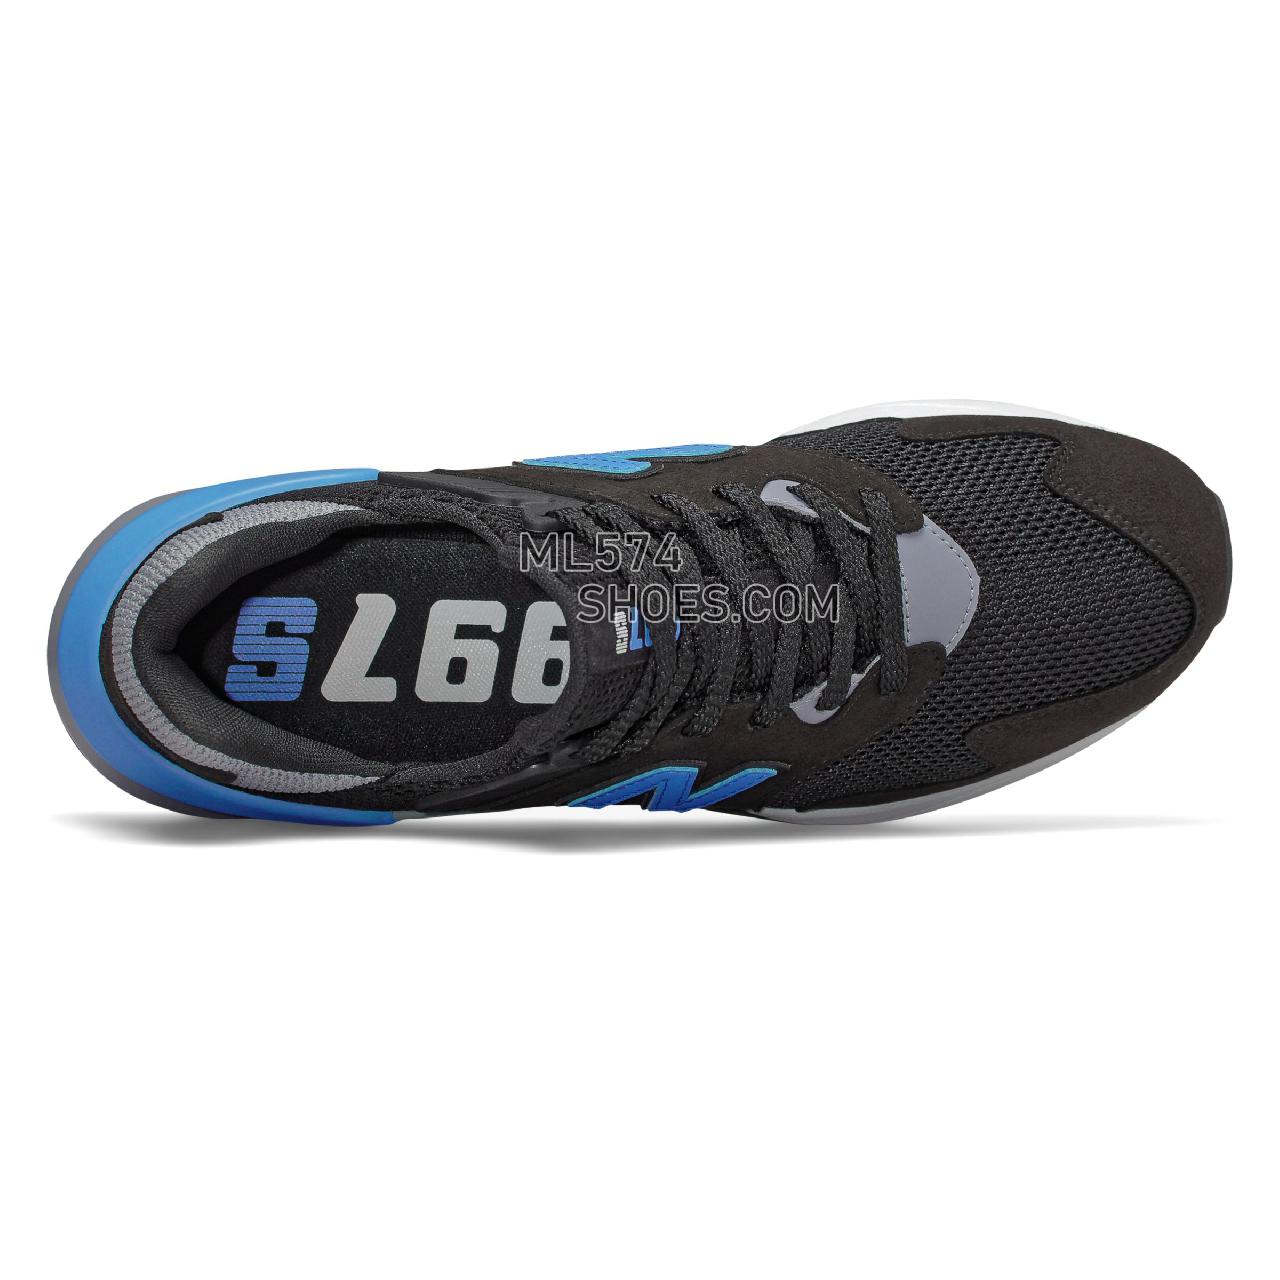 New Balance 997 Sport - Men's Sport Style Sneakers - Black with Light Lapis Blue and White - MS997JKD